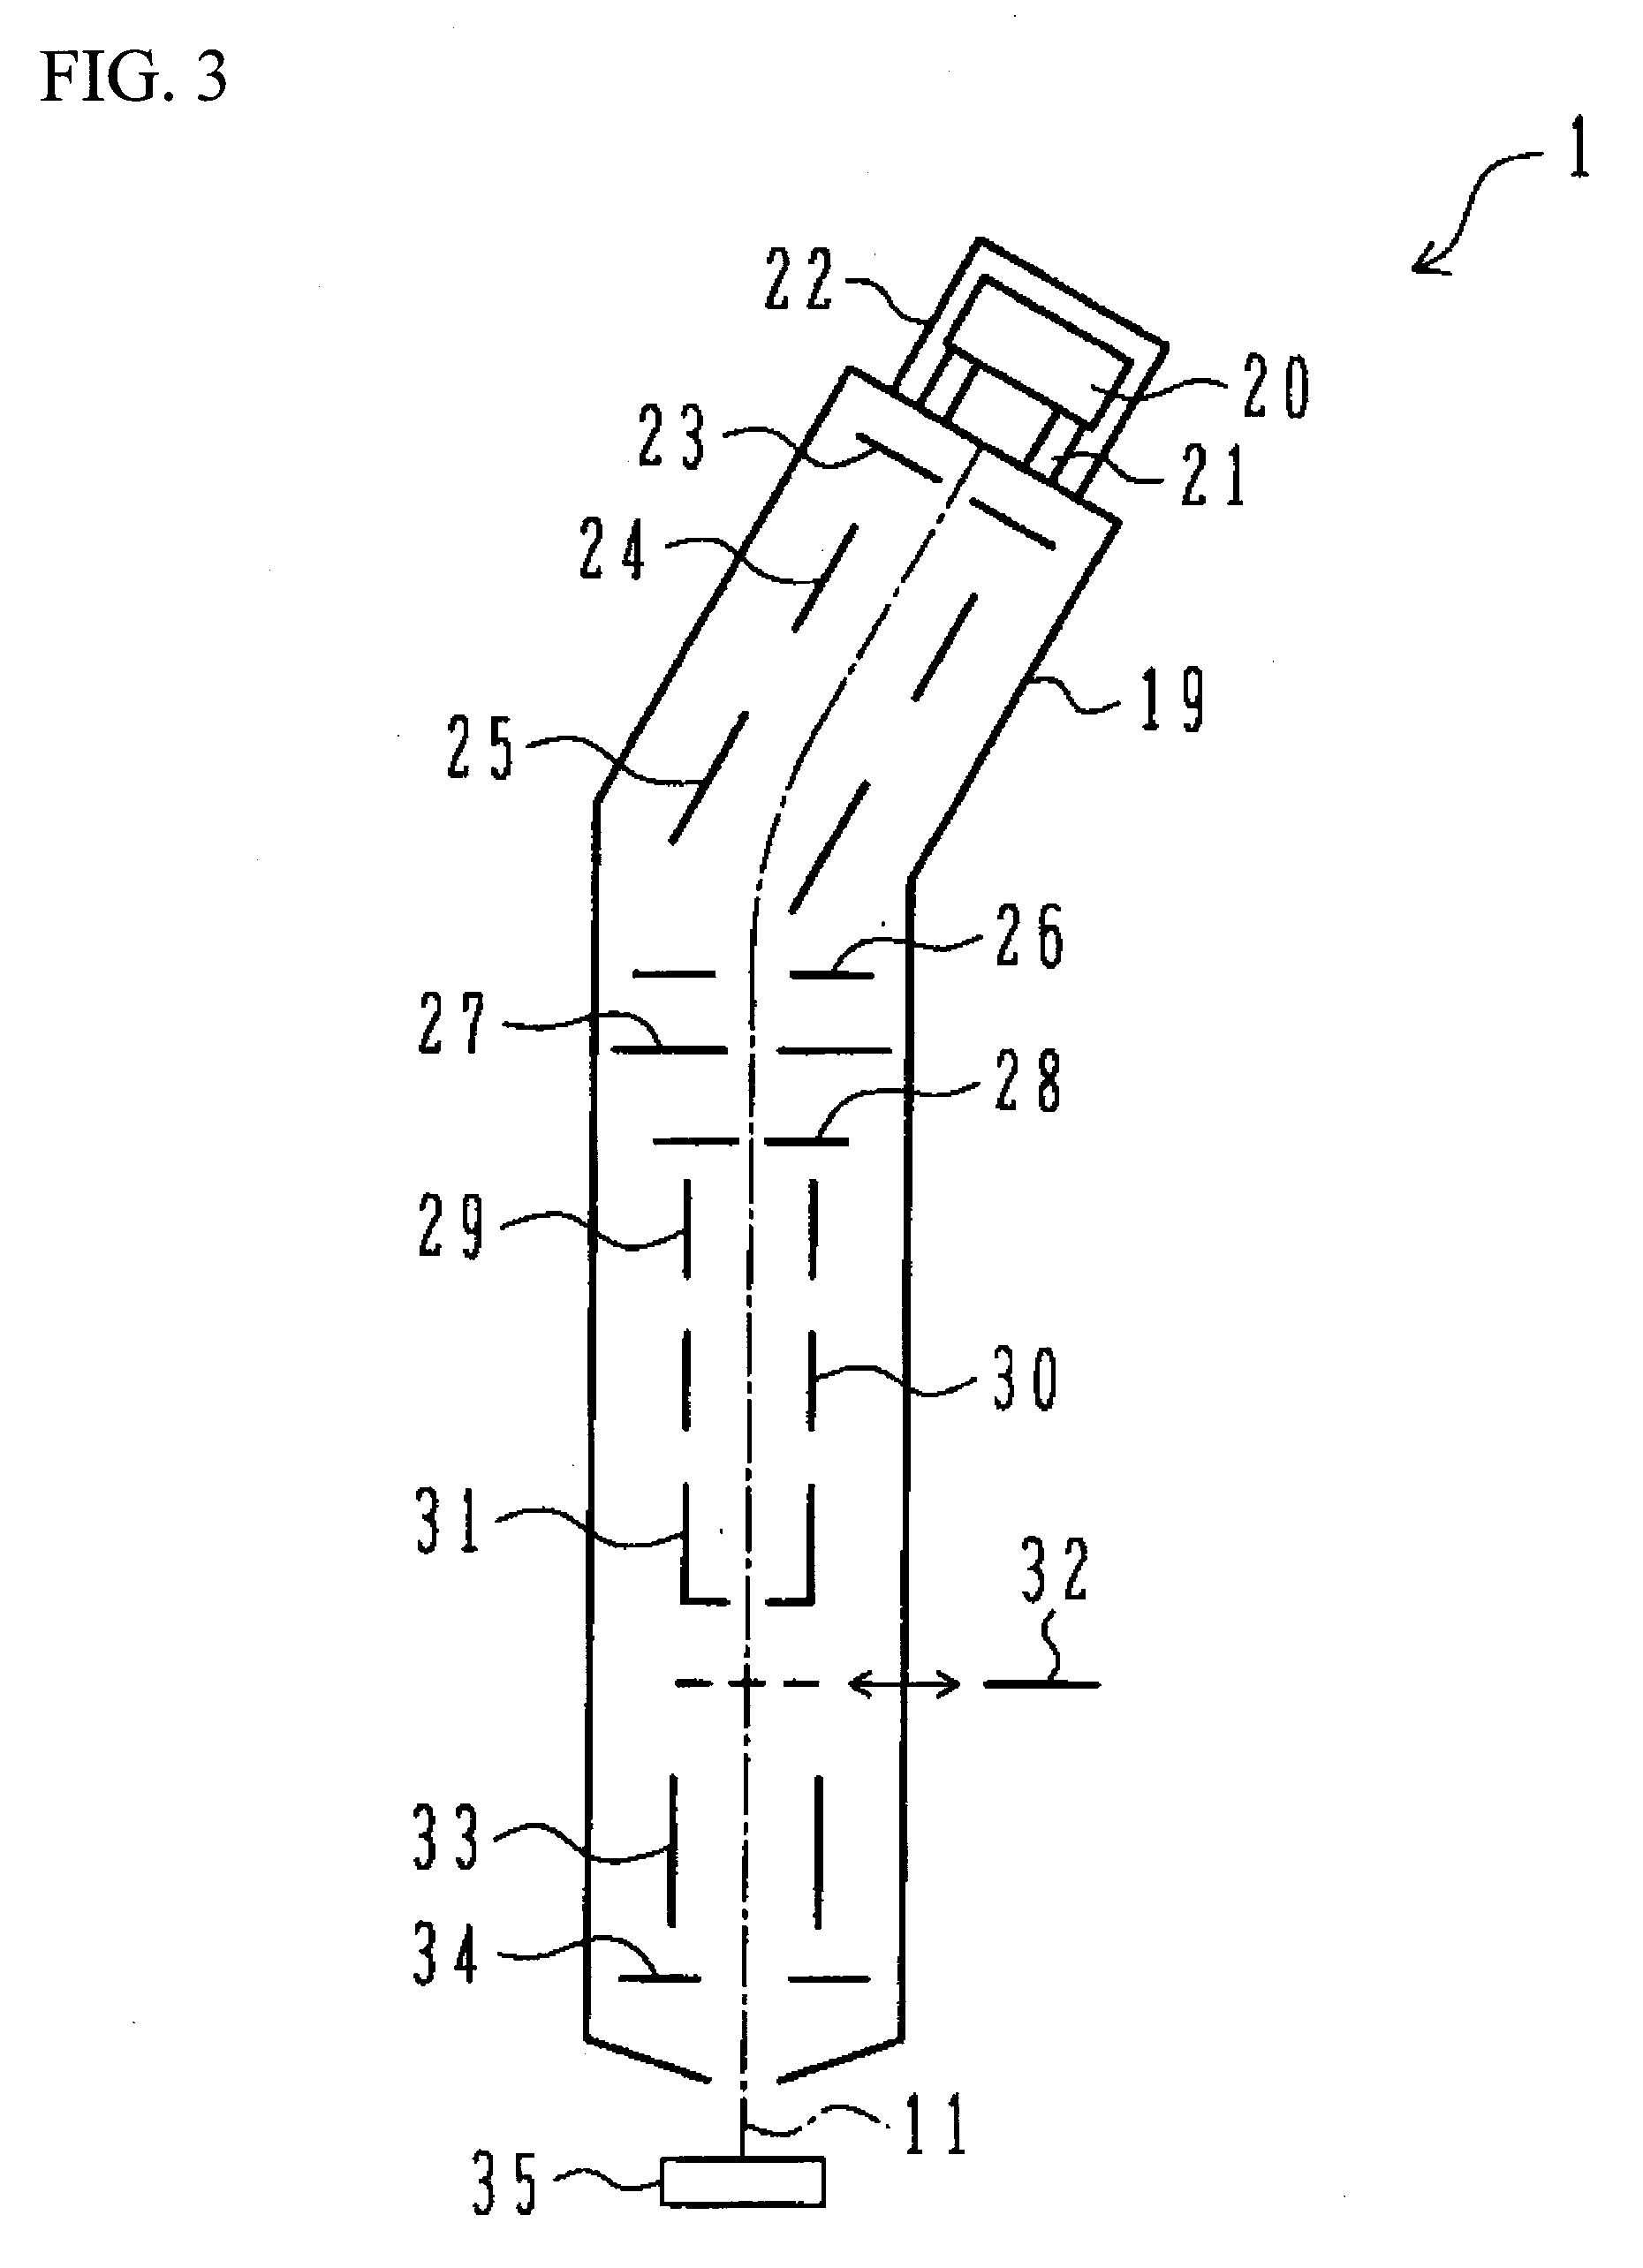 Manufacturing Equipment Using ION Beam or Electron Beam